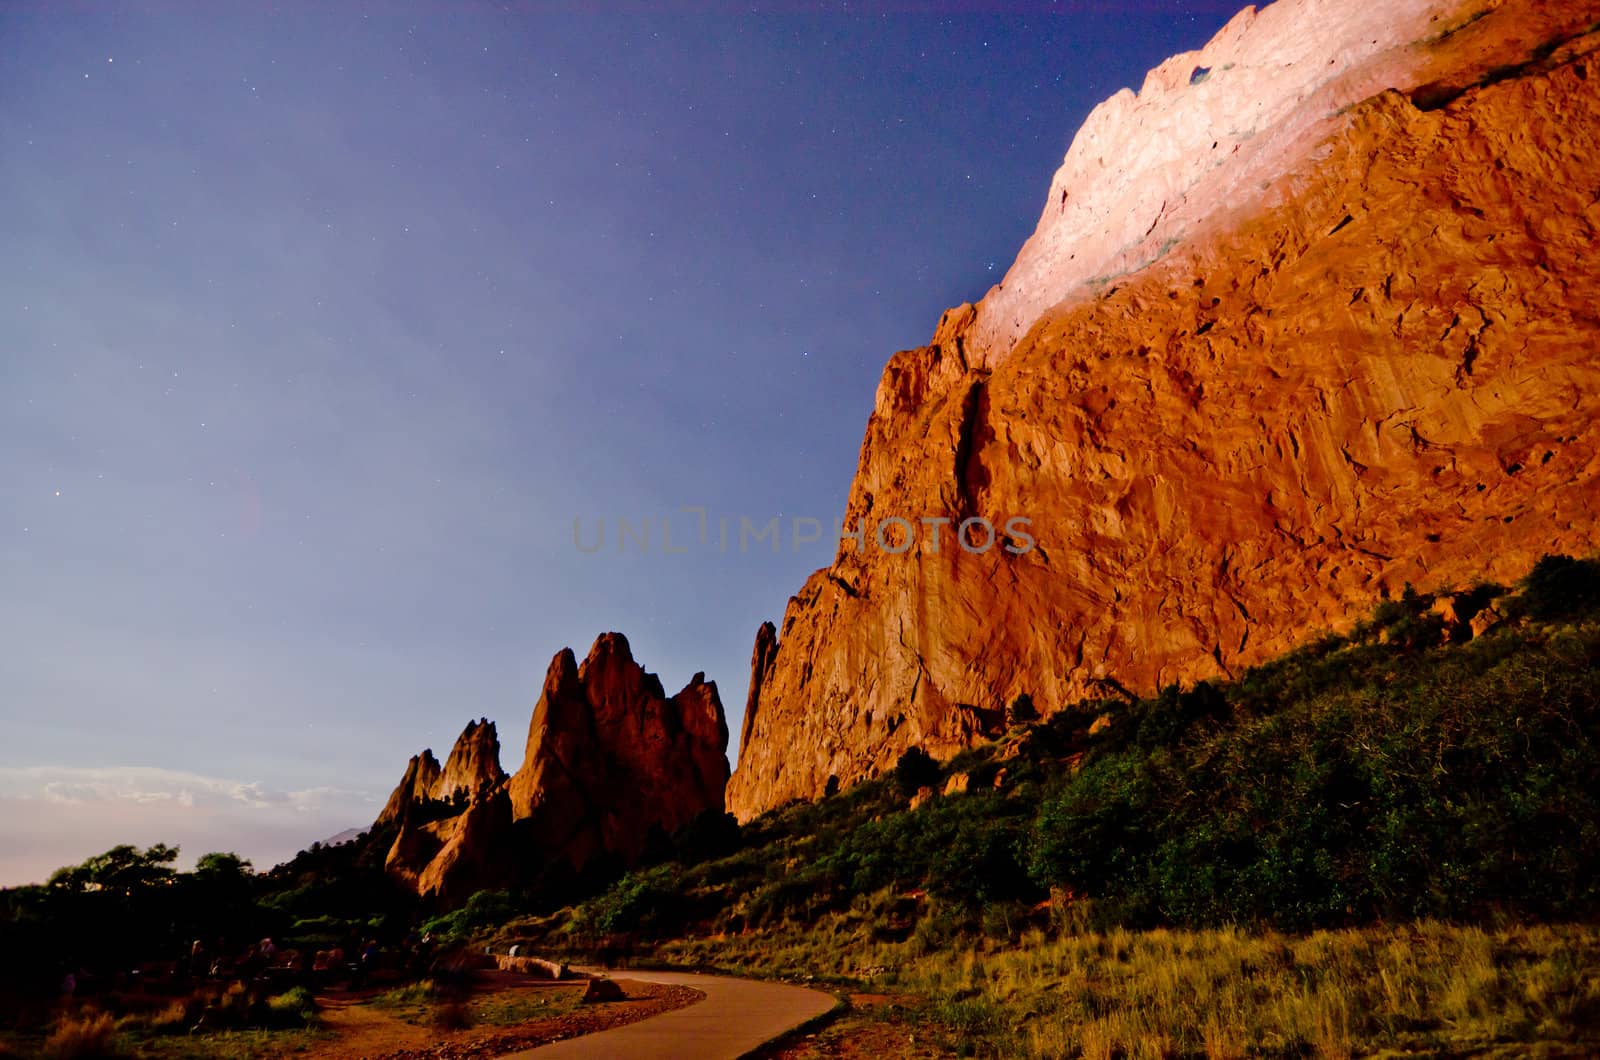 Nighttime Shot of the Rock Formations at Garden of the Gods in Colorado Springs, Colorado by robert.bohrer25@gmail.com